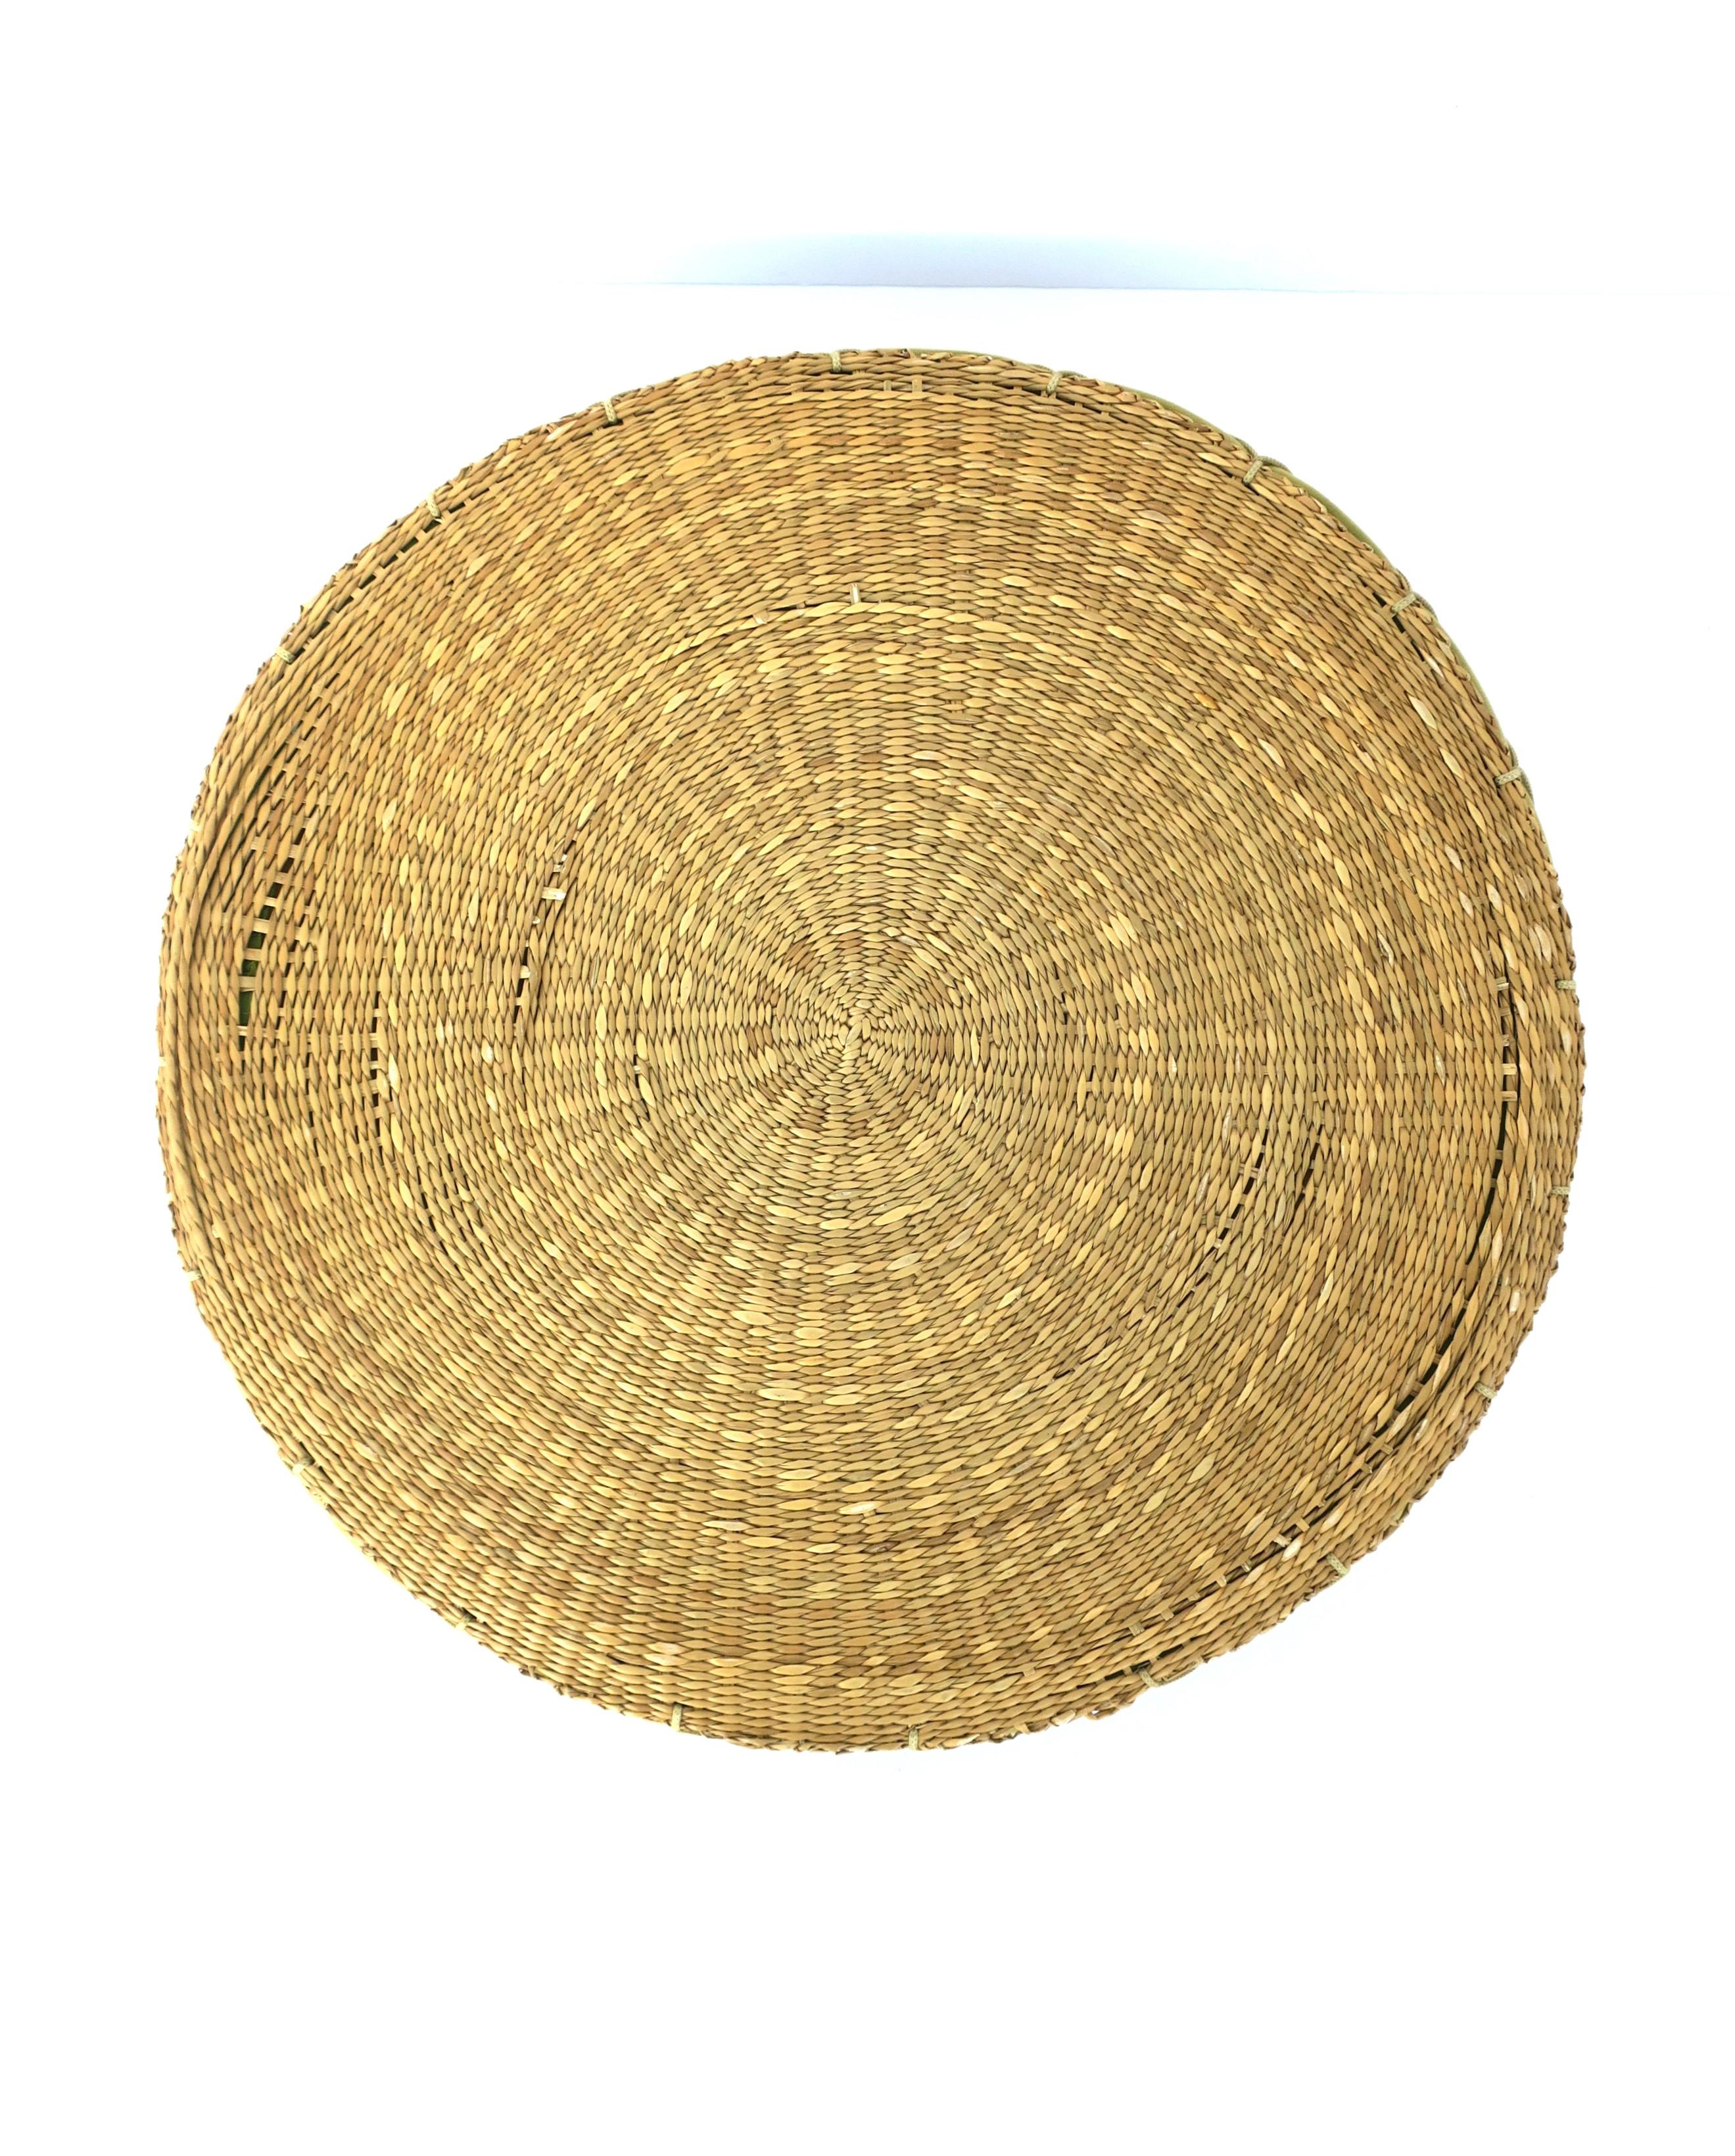 Wicker Seat or Floor Cushion, Green and Tan For Sale 8